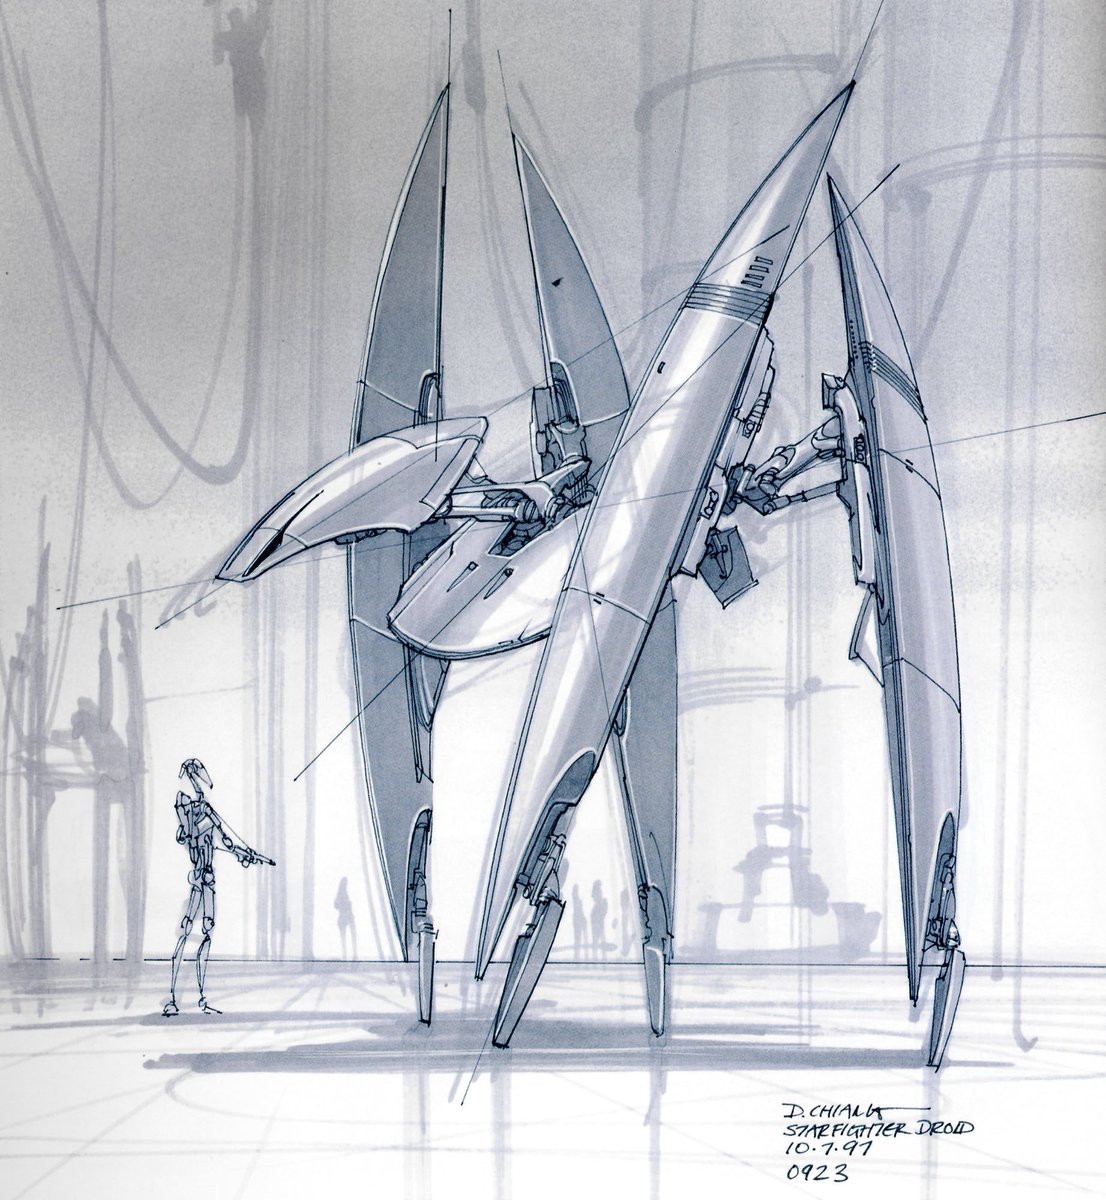 Then Doug Chiang was Design director, leader of the Lucasfilm art department (as...now), for The Phantom Menace (1999)...